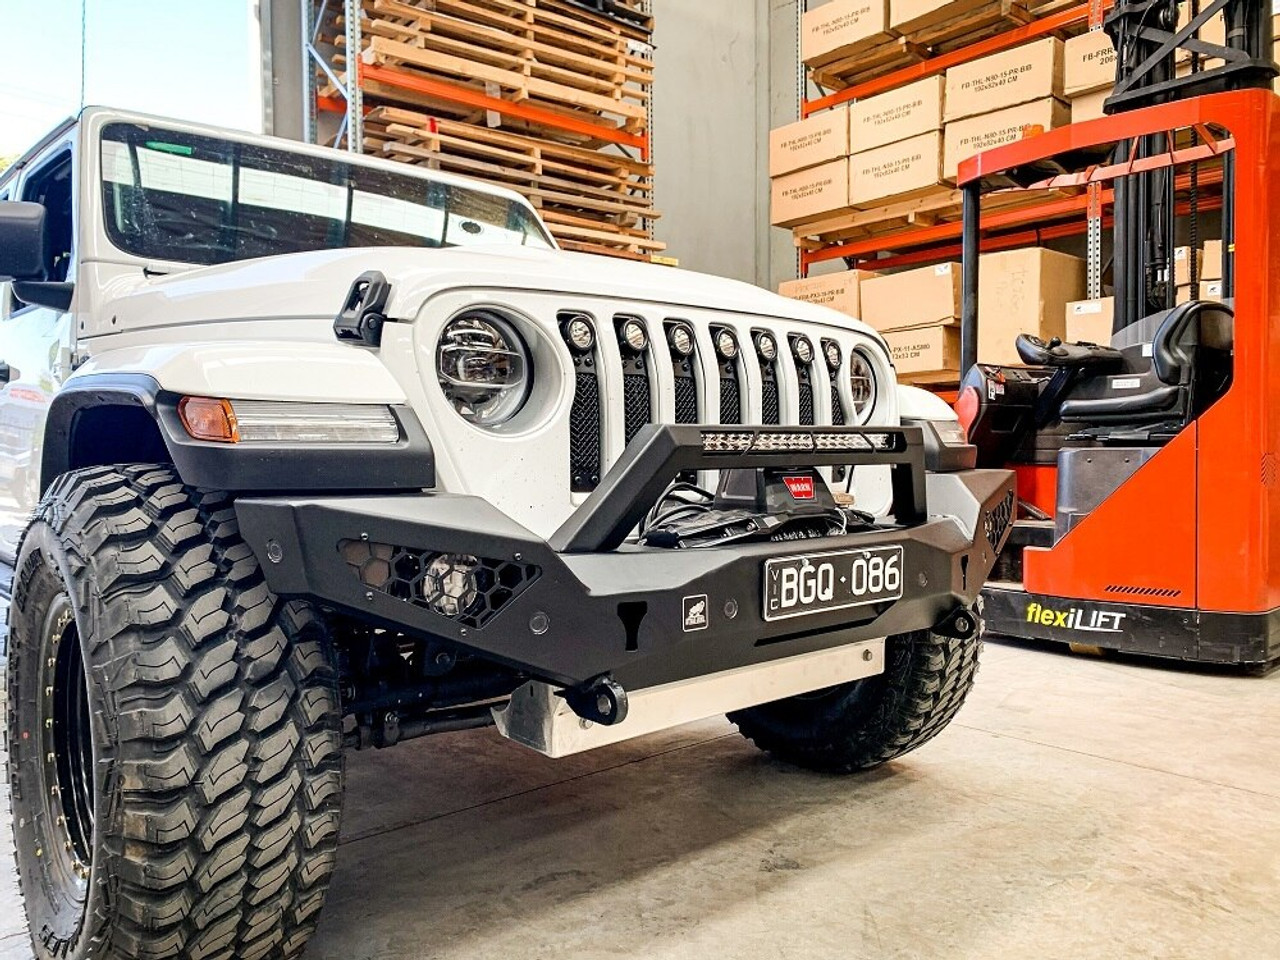 JL Predator bar fitting with optional winch, top hoop light and skid plate